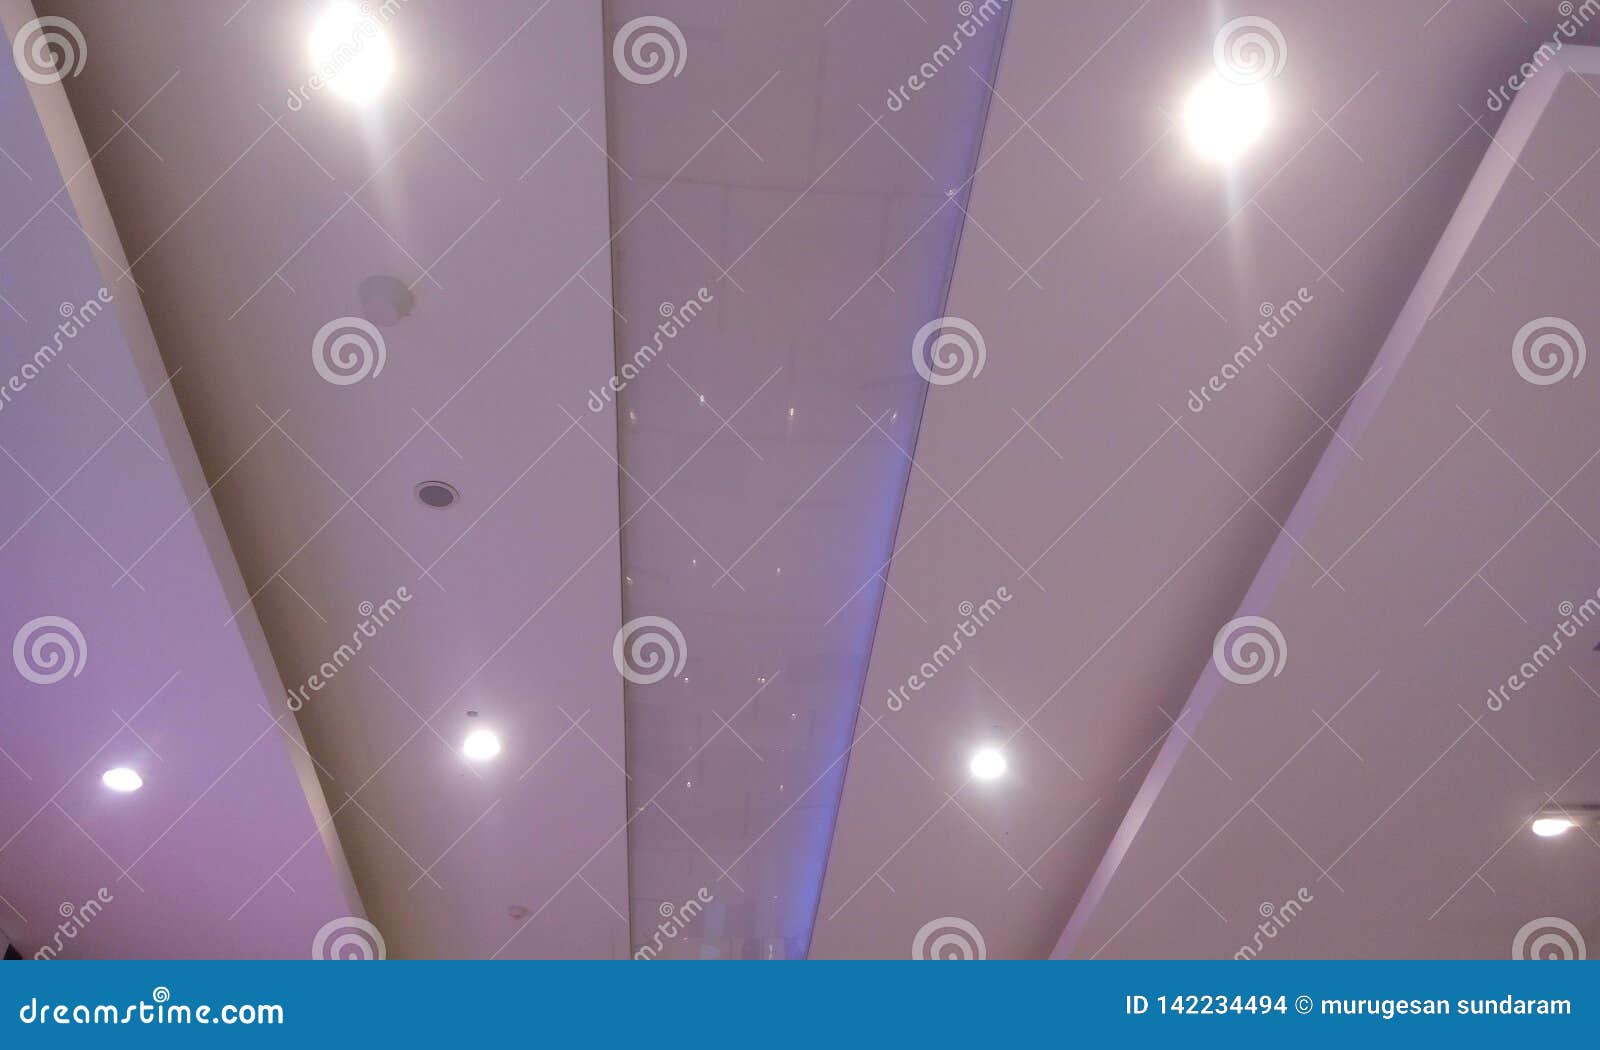 Glass Roof Finish And Gypsum False Ceiling Finishes With